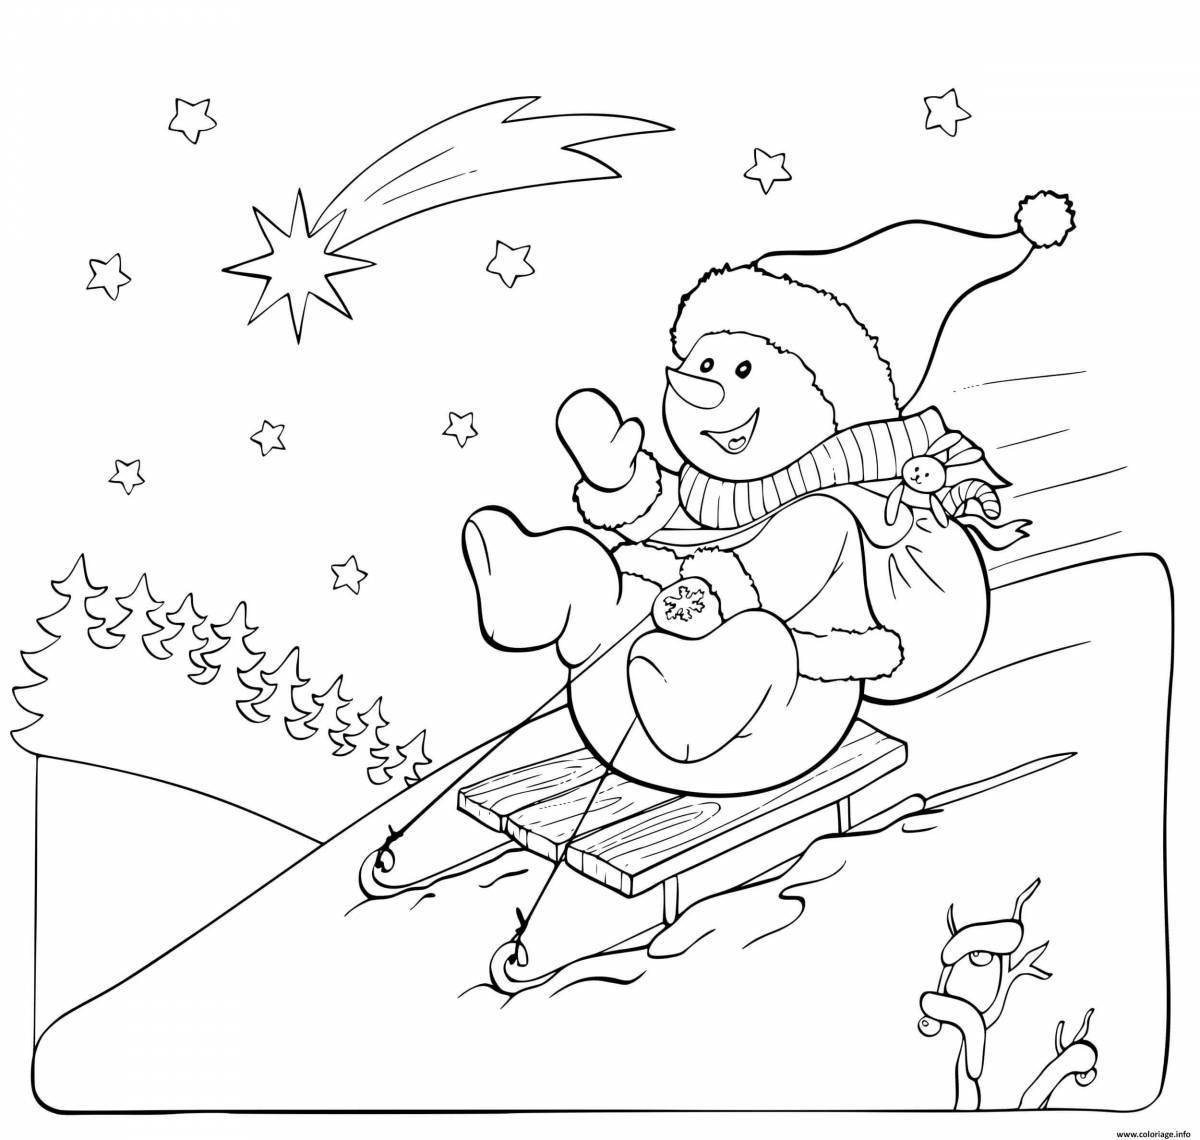 Coloring book bright snowman on a sled